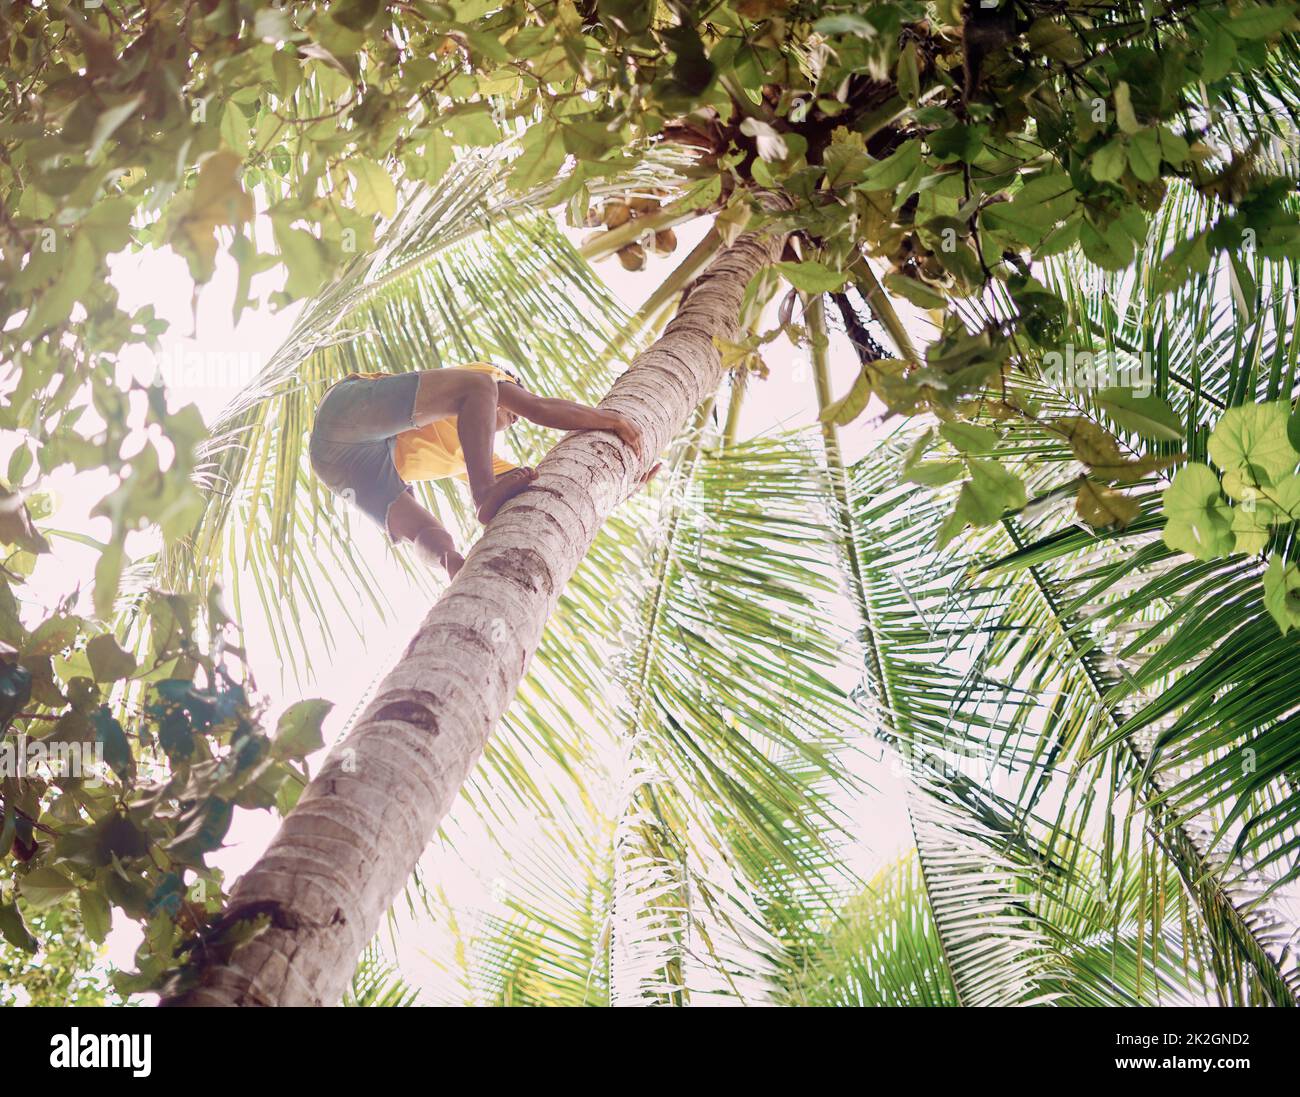 The tastiest ones are up there at the top. Low angle shot of a young man climbing up a coconut palm tree in Raja Ampat, Indonesia. Stock Photo